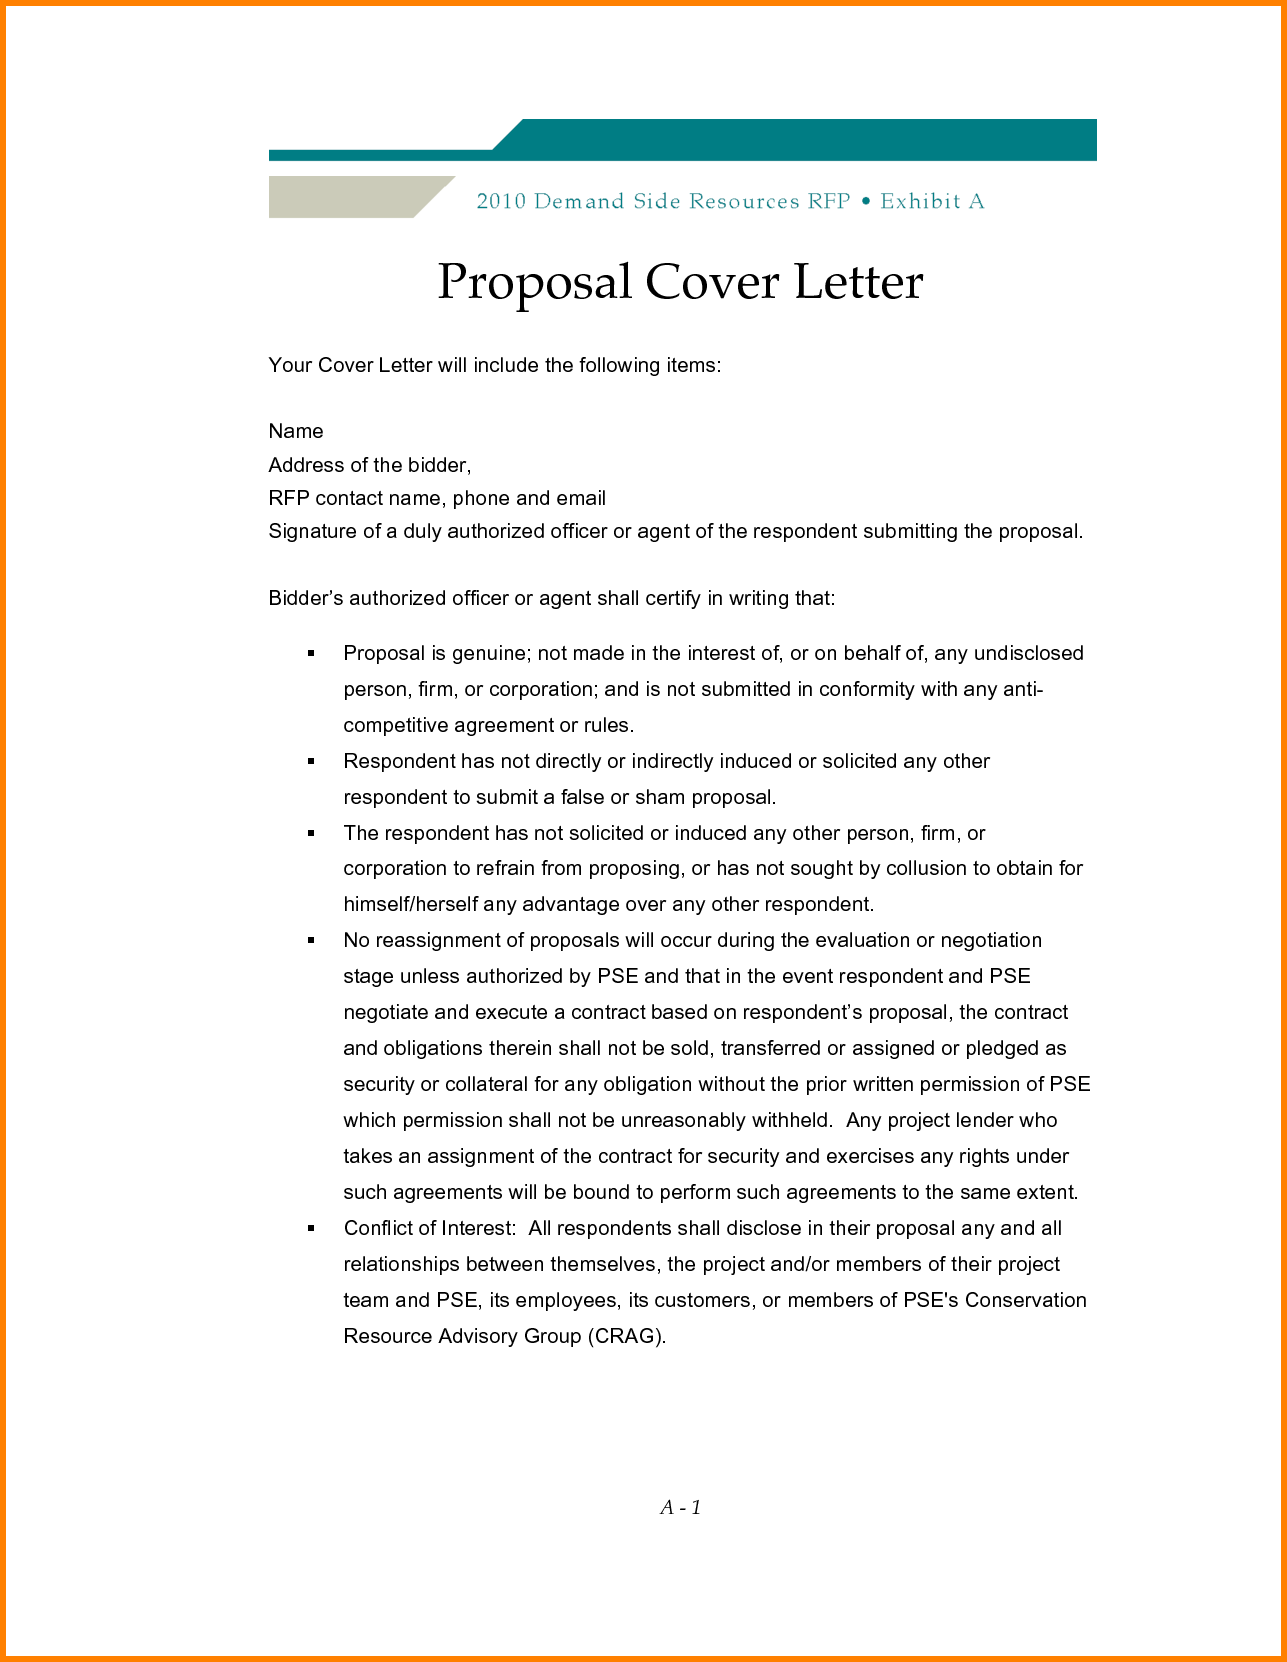 21+ Business Proposal Letter Examples PDF, DOC